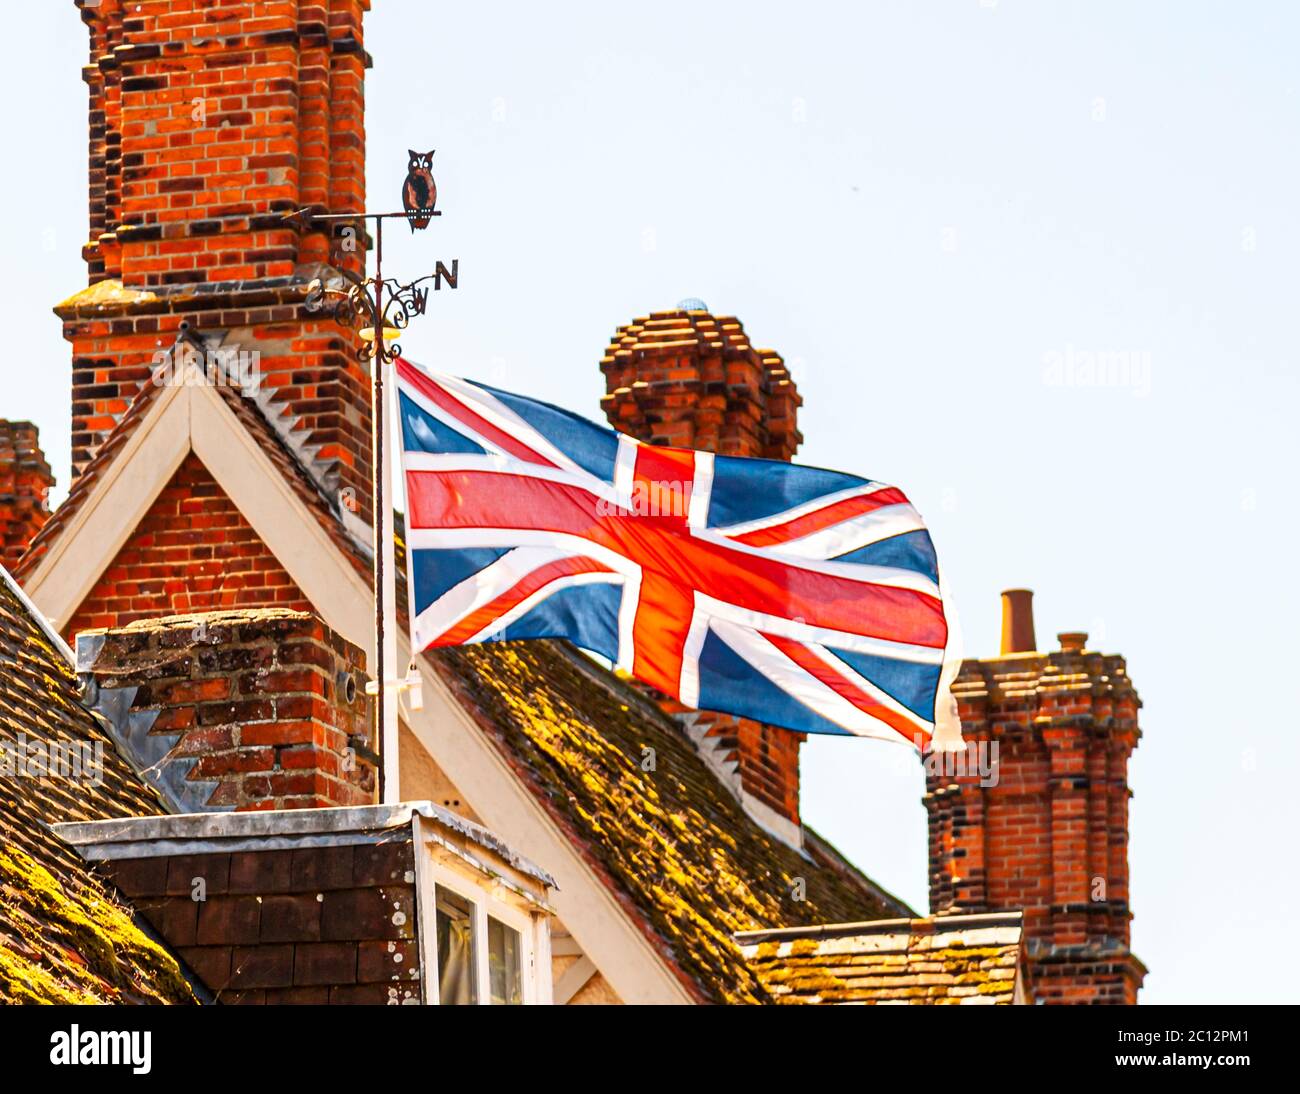 Roofs with chimneys and Union Jack flag in East Suffolk, England Stock Photo